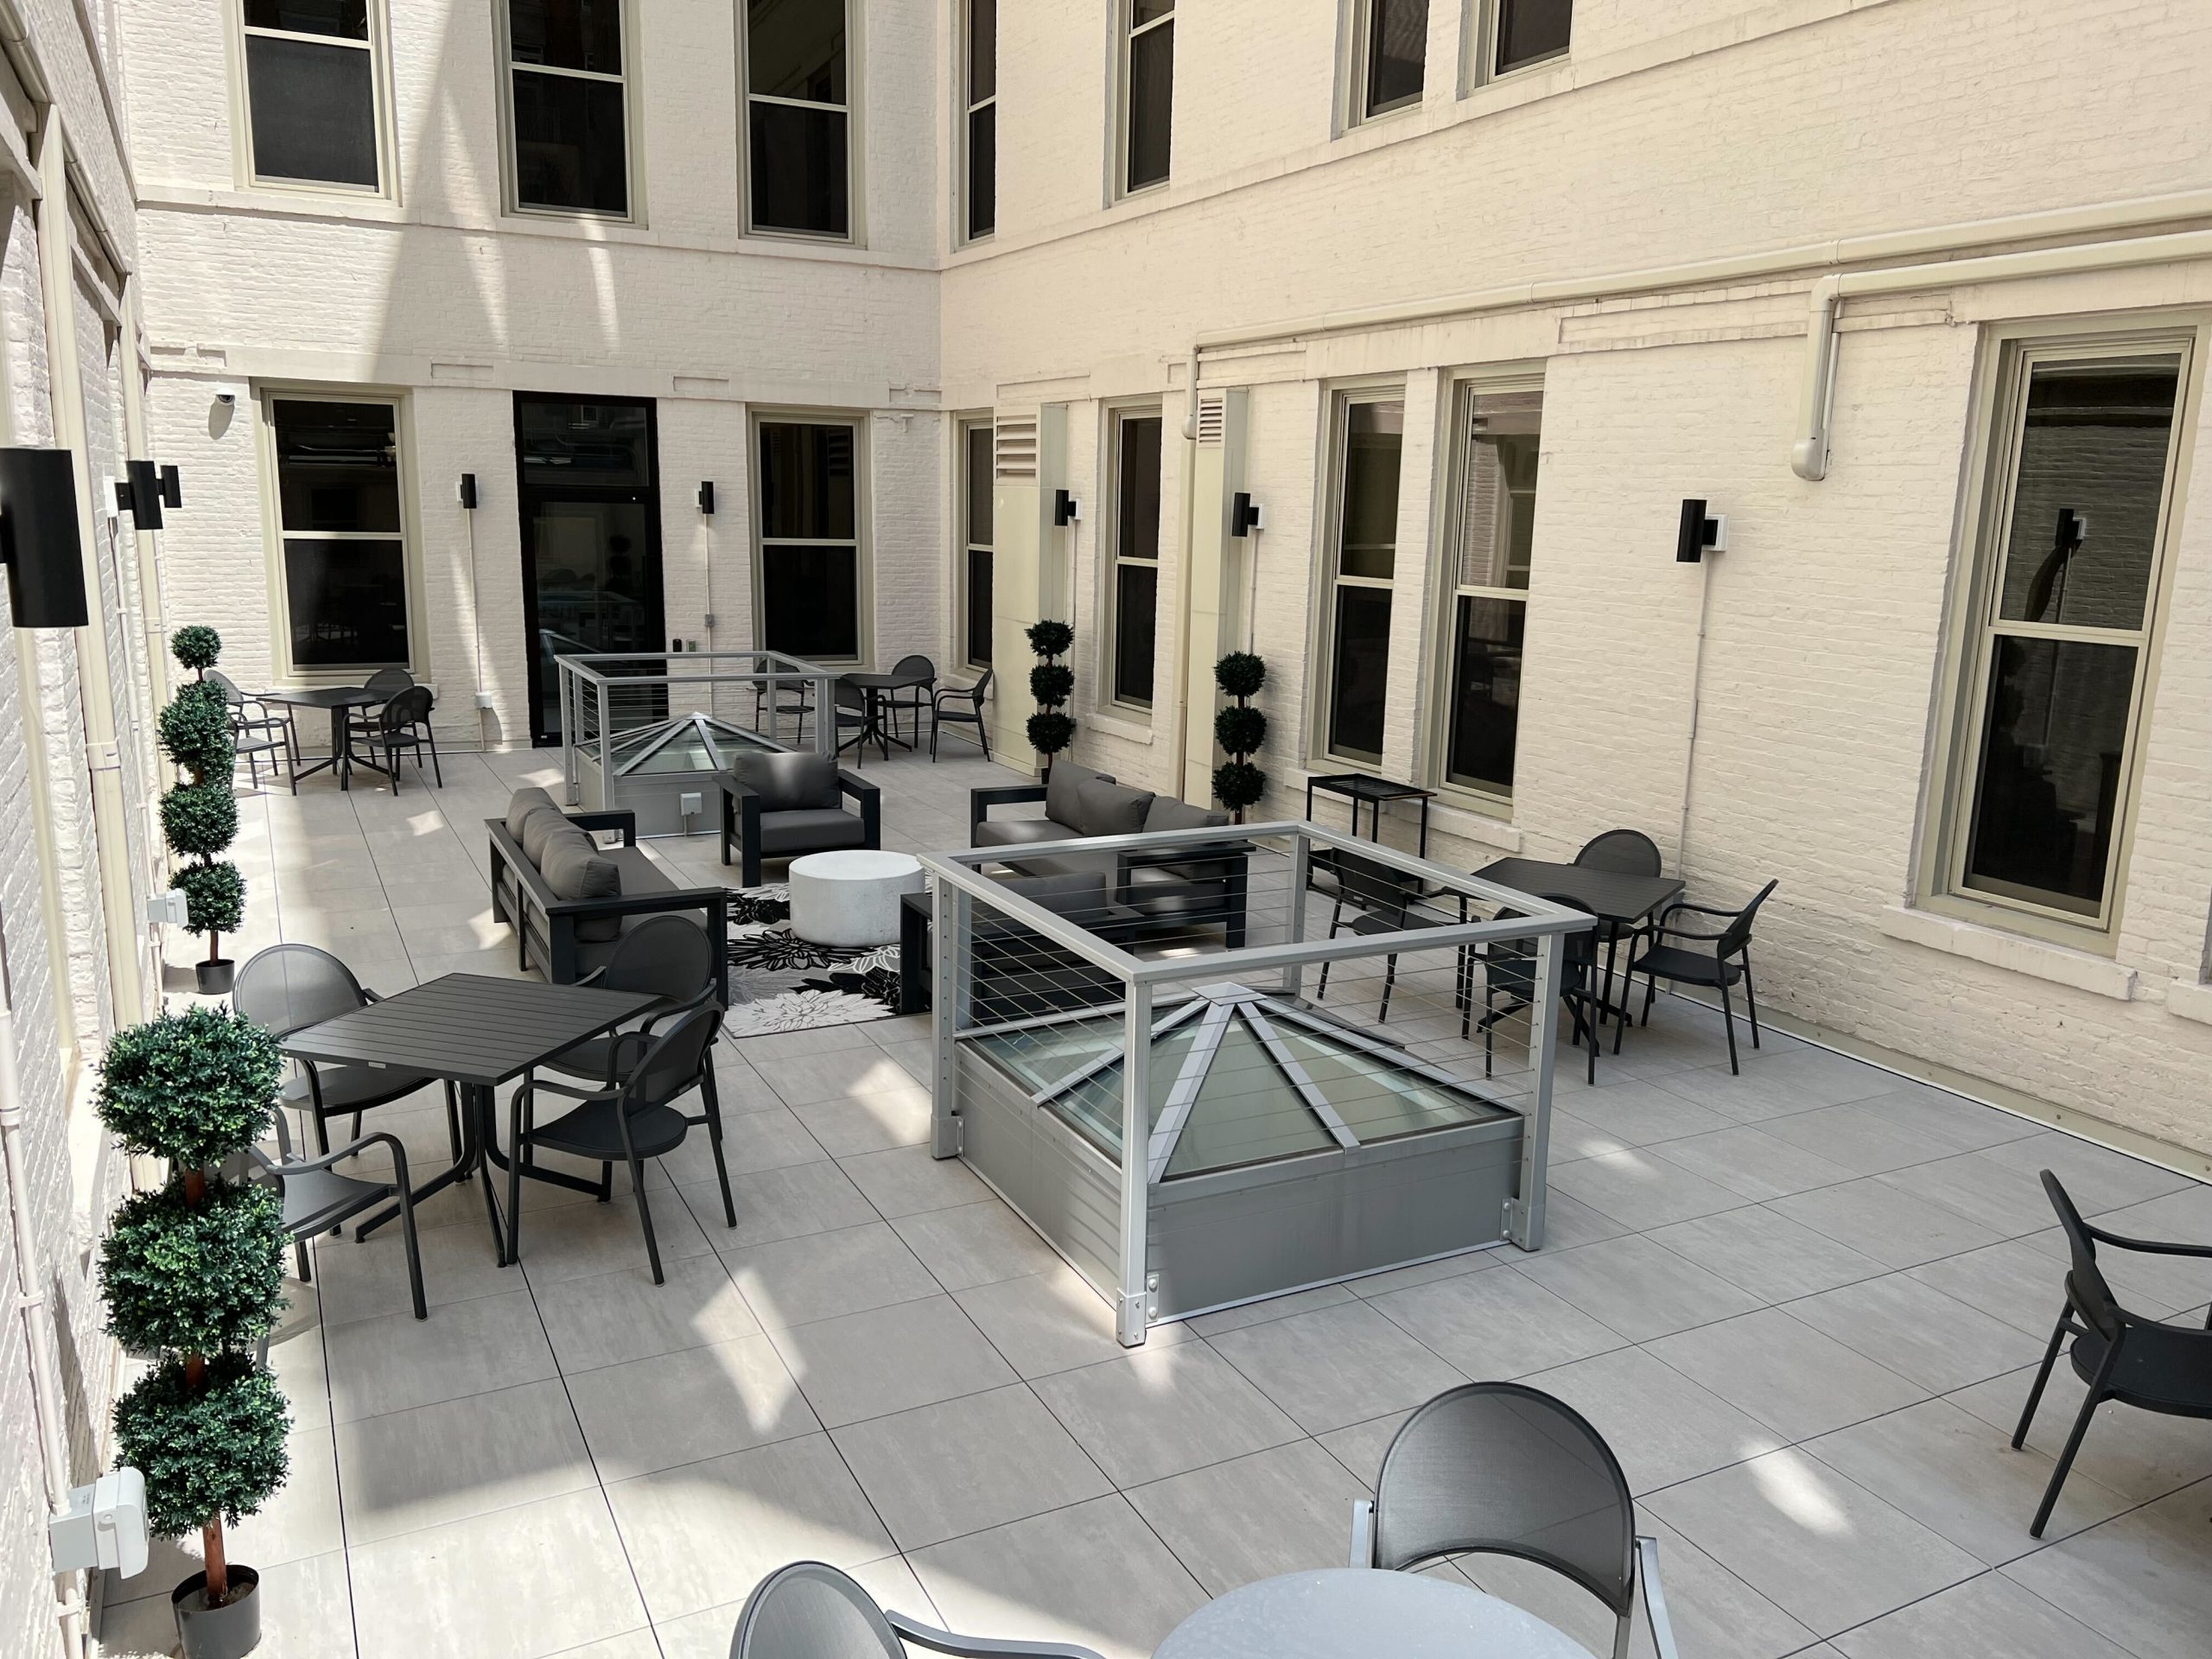 Courtyard deck at Colby Abbot Building. Photo by Jeramey Jannene.